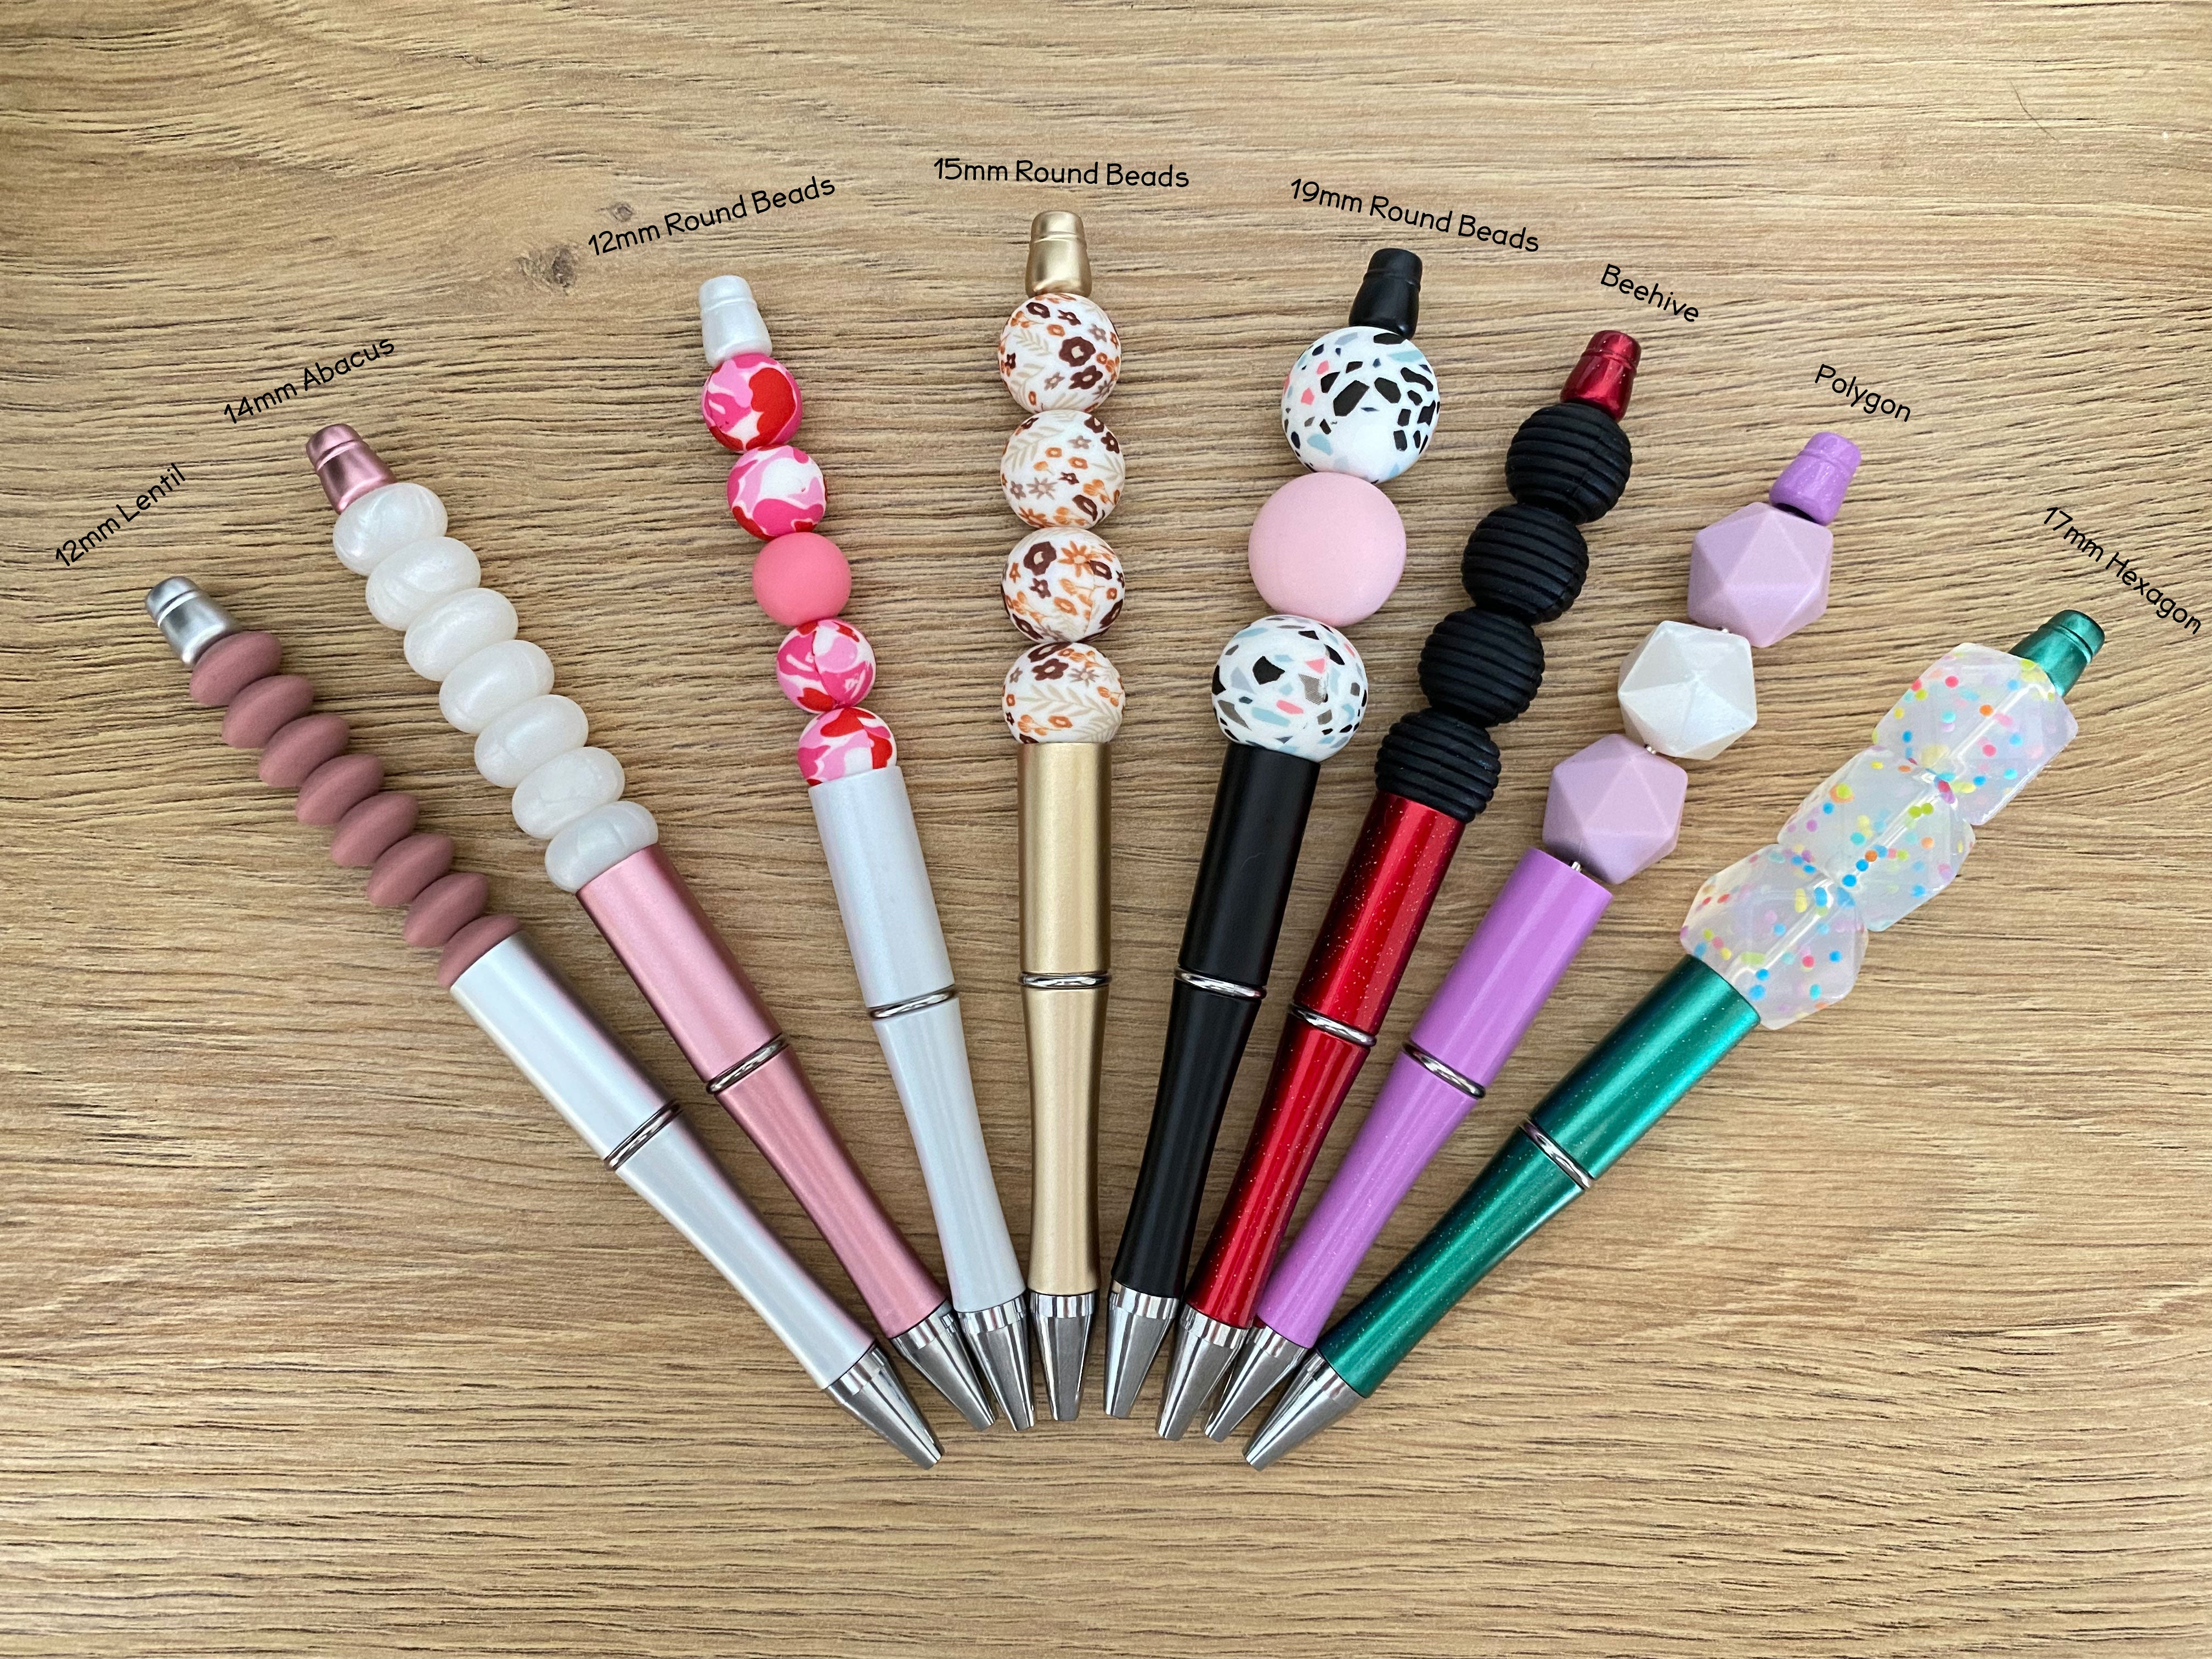 Beadable Pen Bead Pens With Assorted Beads For Pens Multicolor